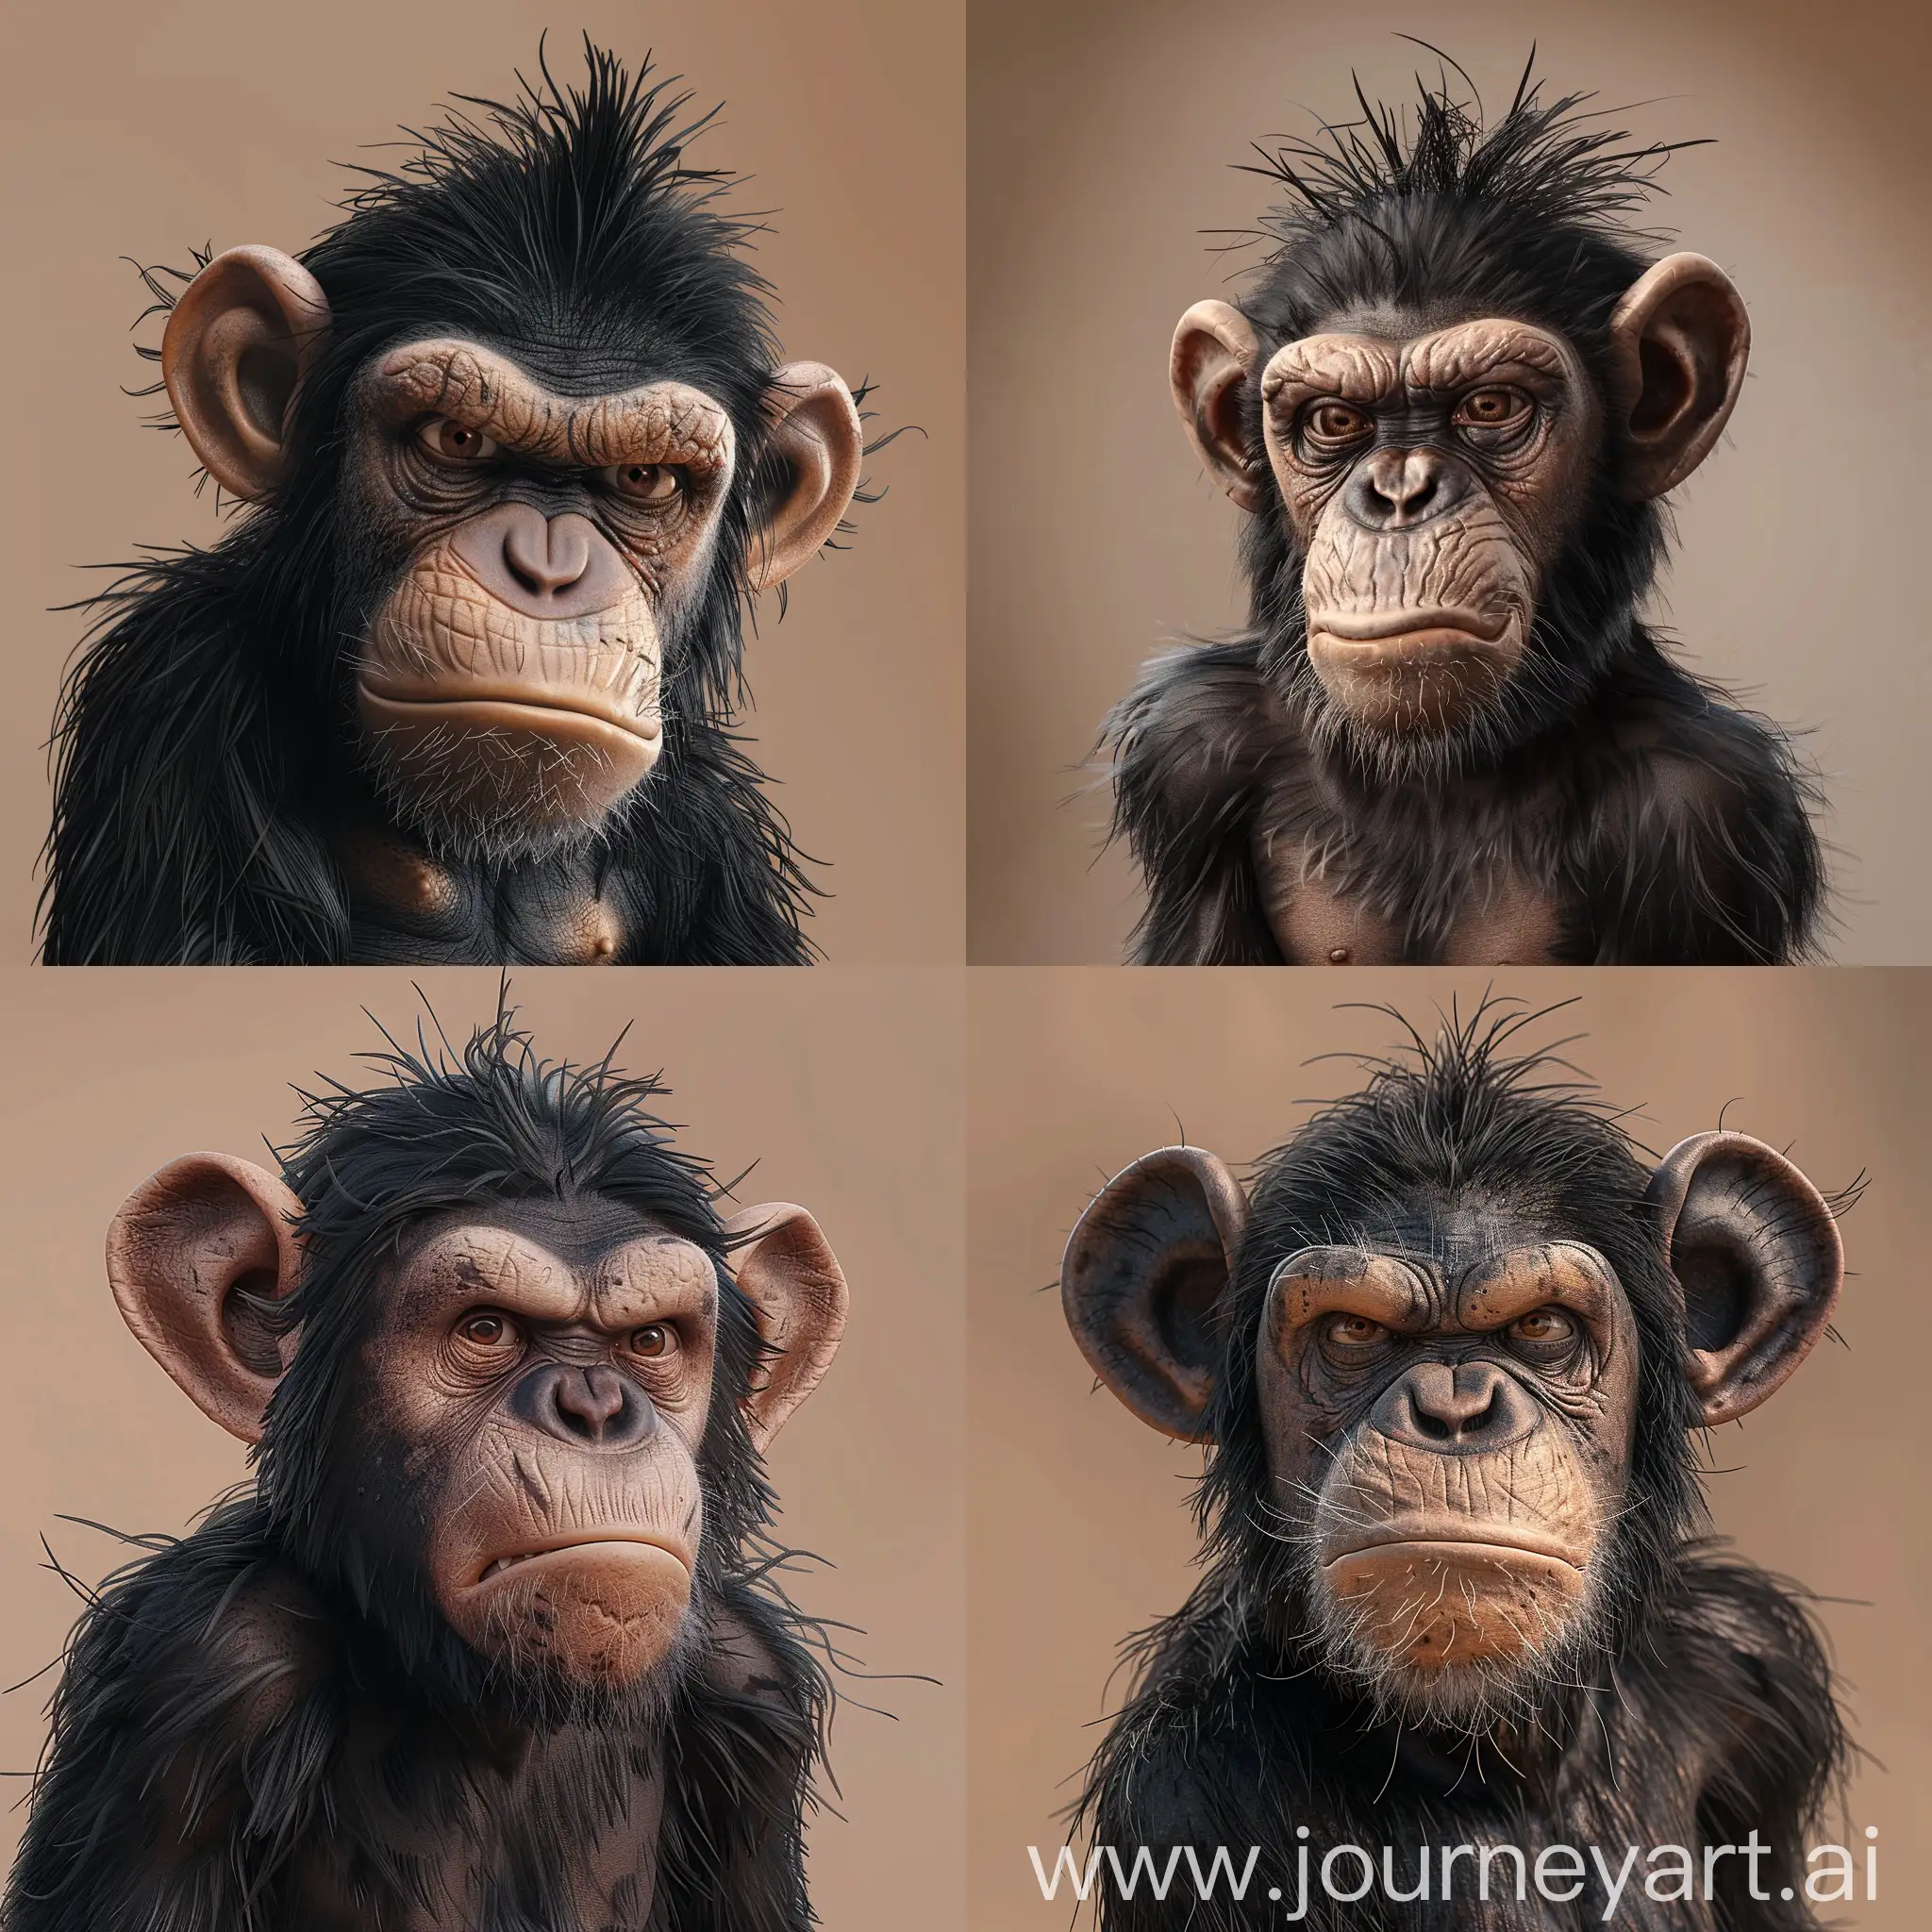 Angry-Chimpanzee-with-Spiky-Black-Hair-on-Light-Brown-Background